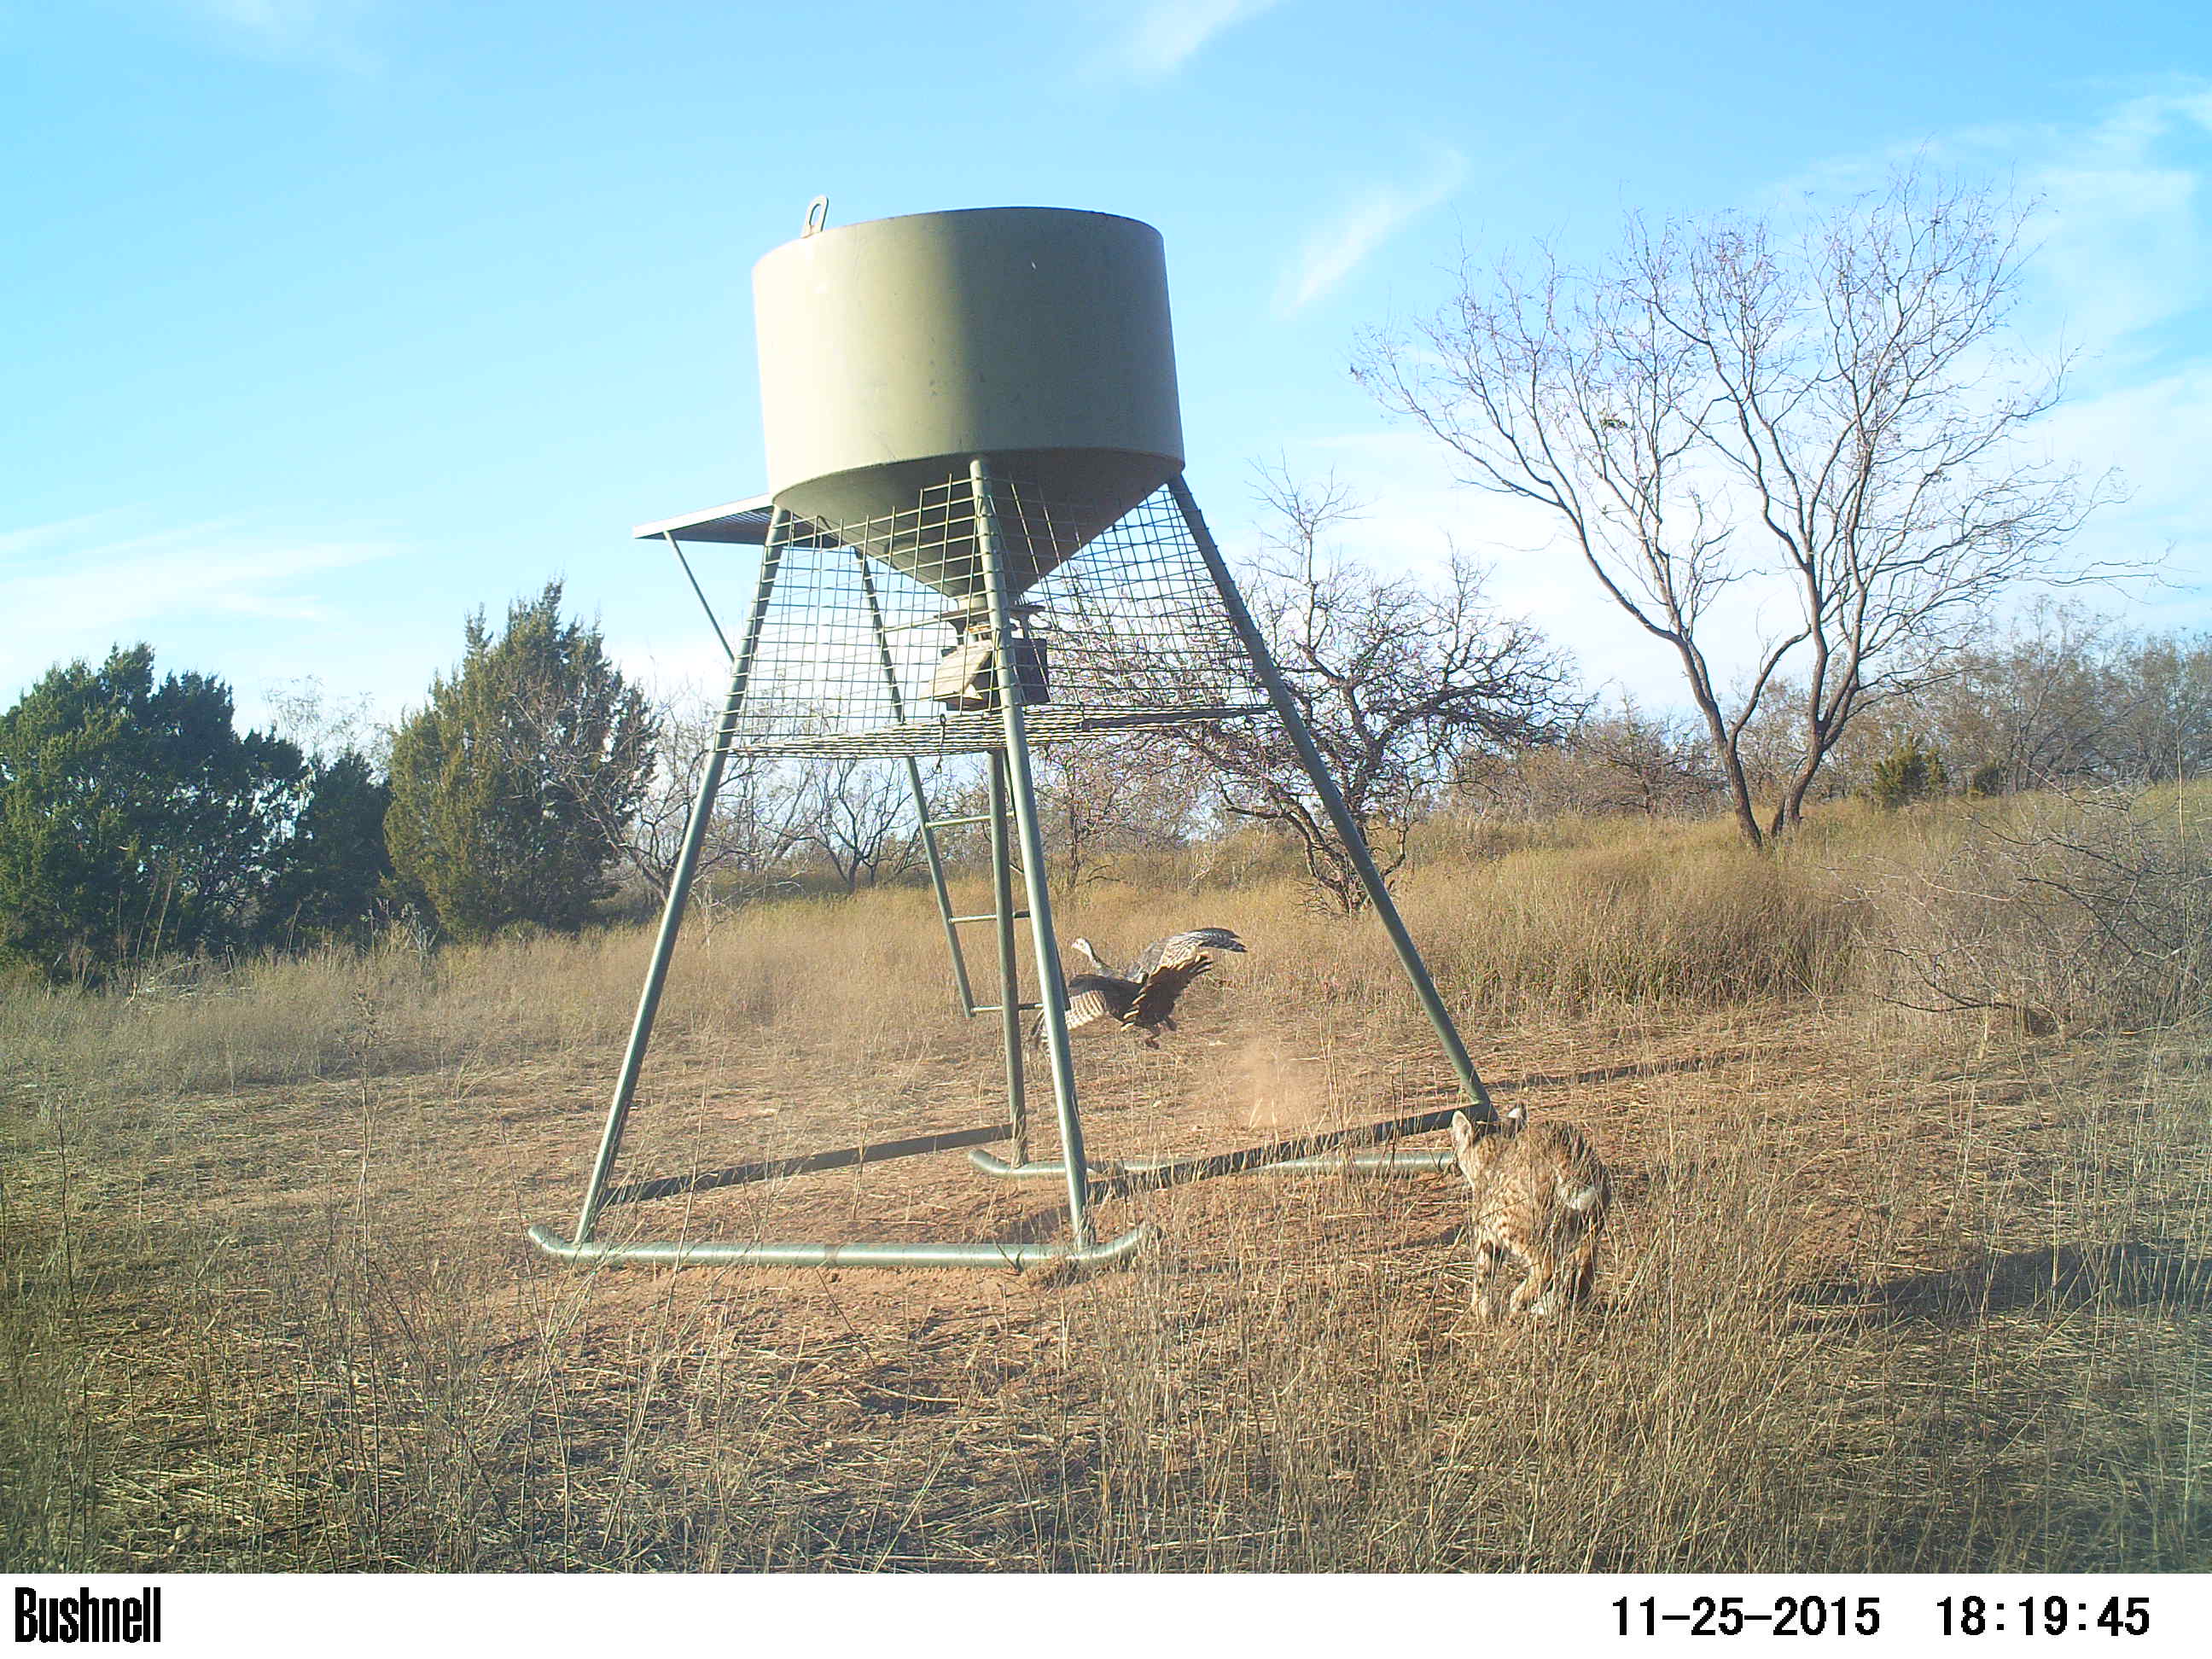 animals at feeder in texas